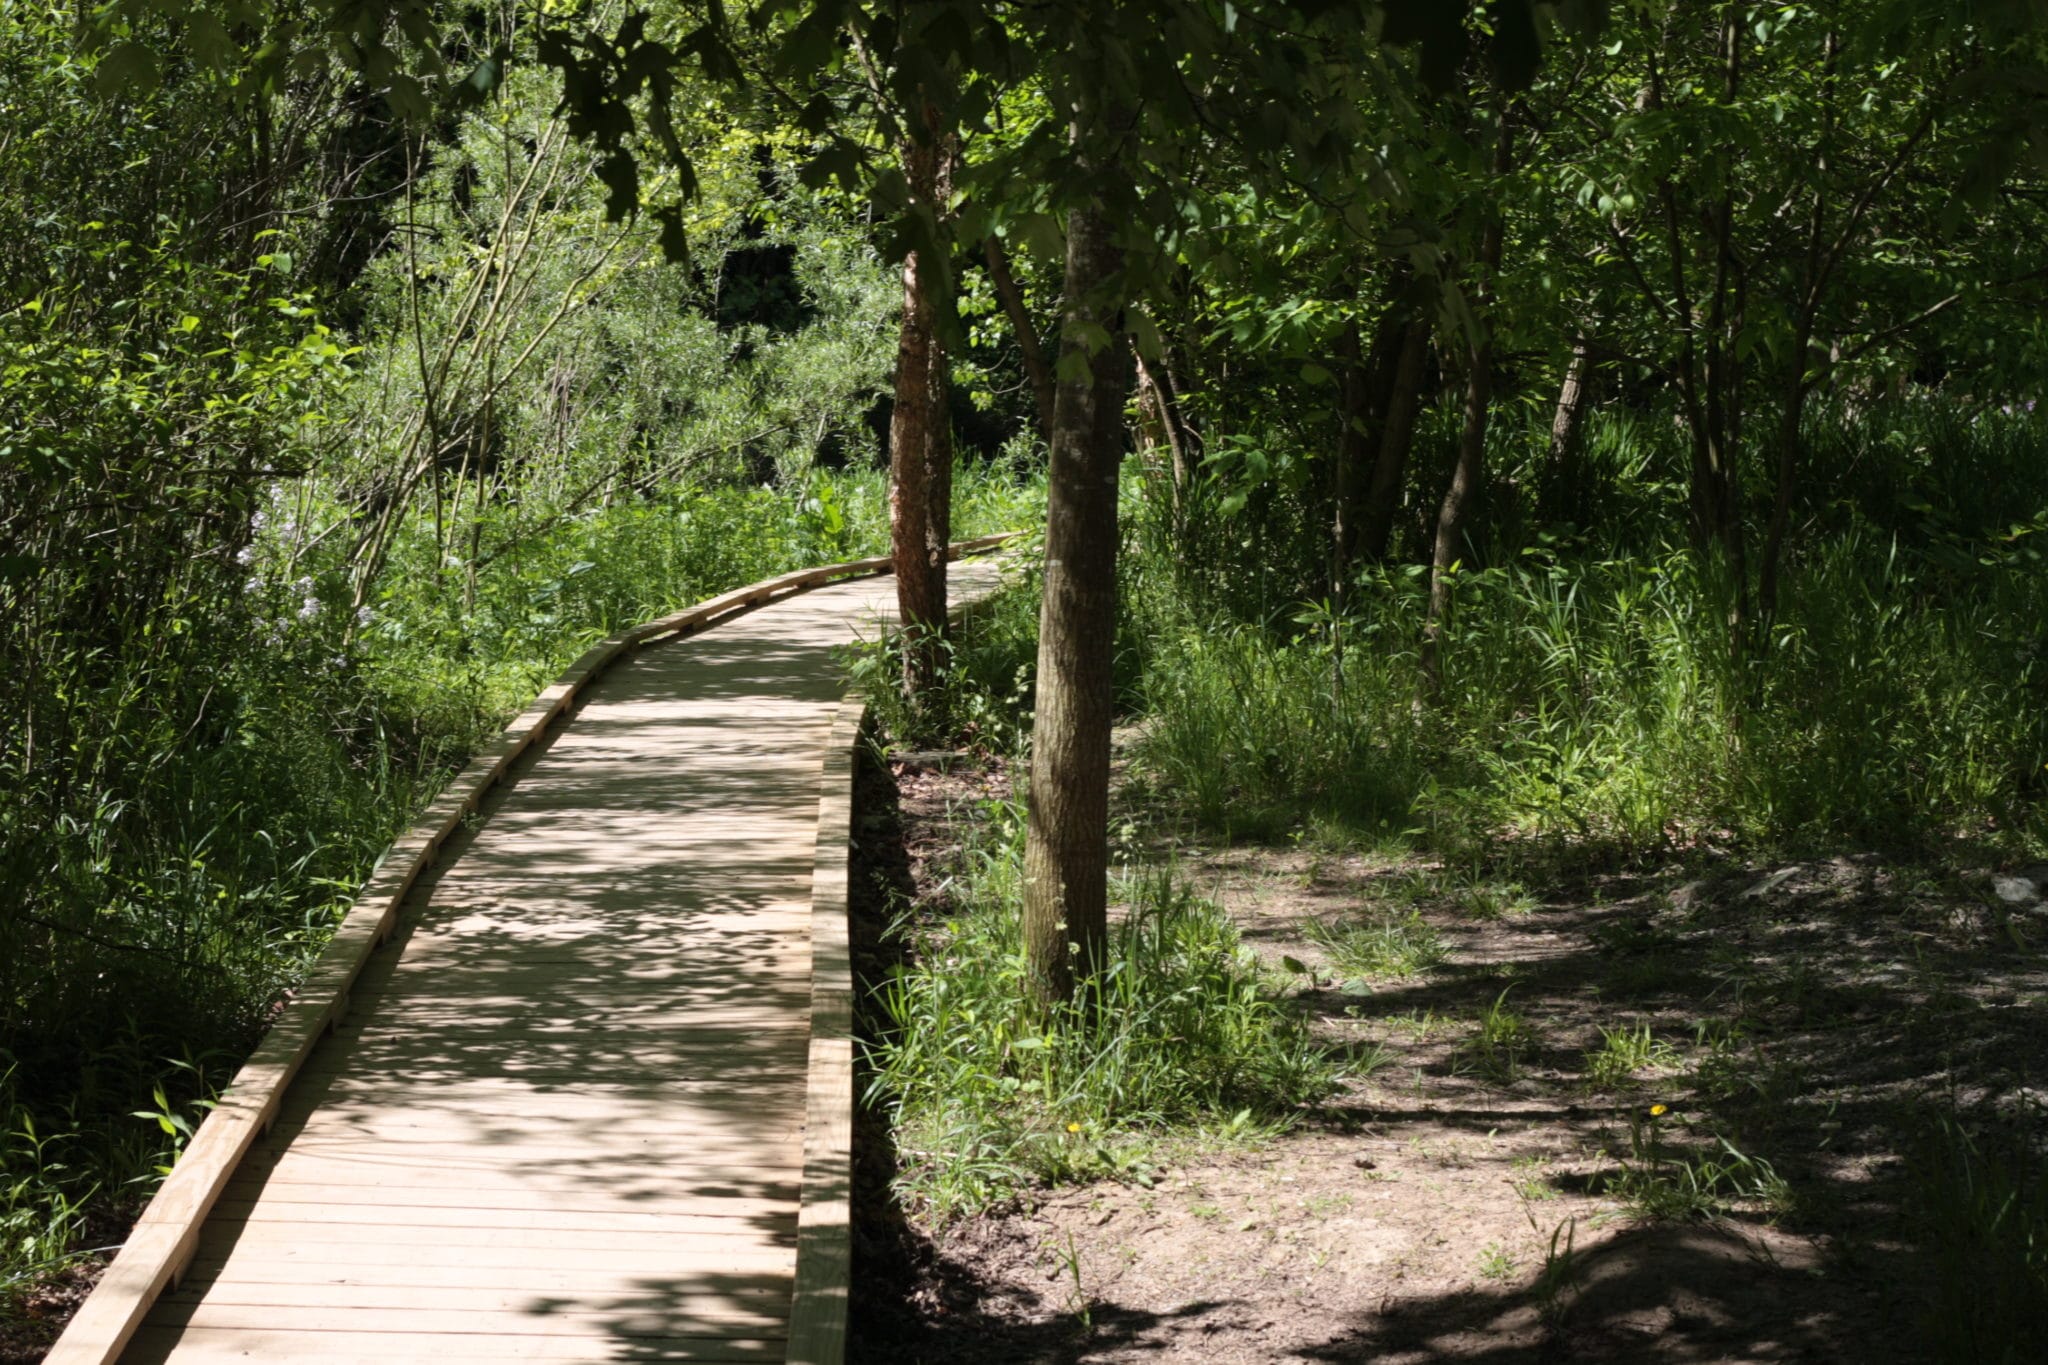 Wooden path with trees and grass